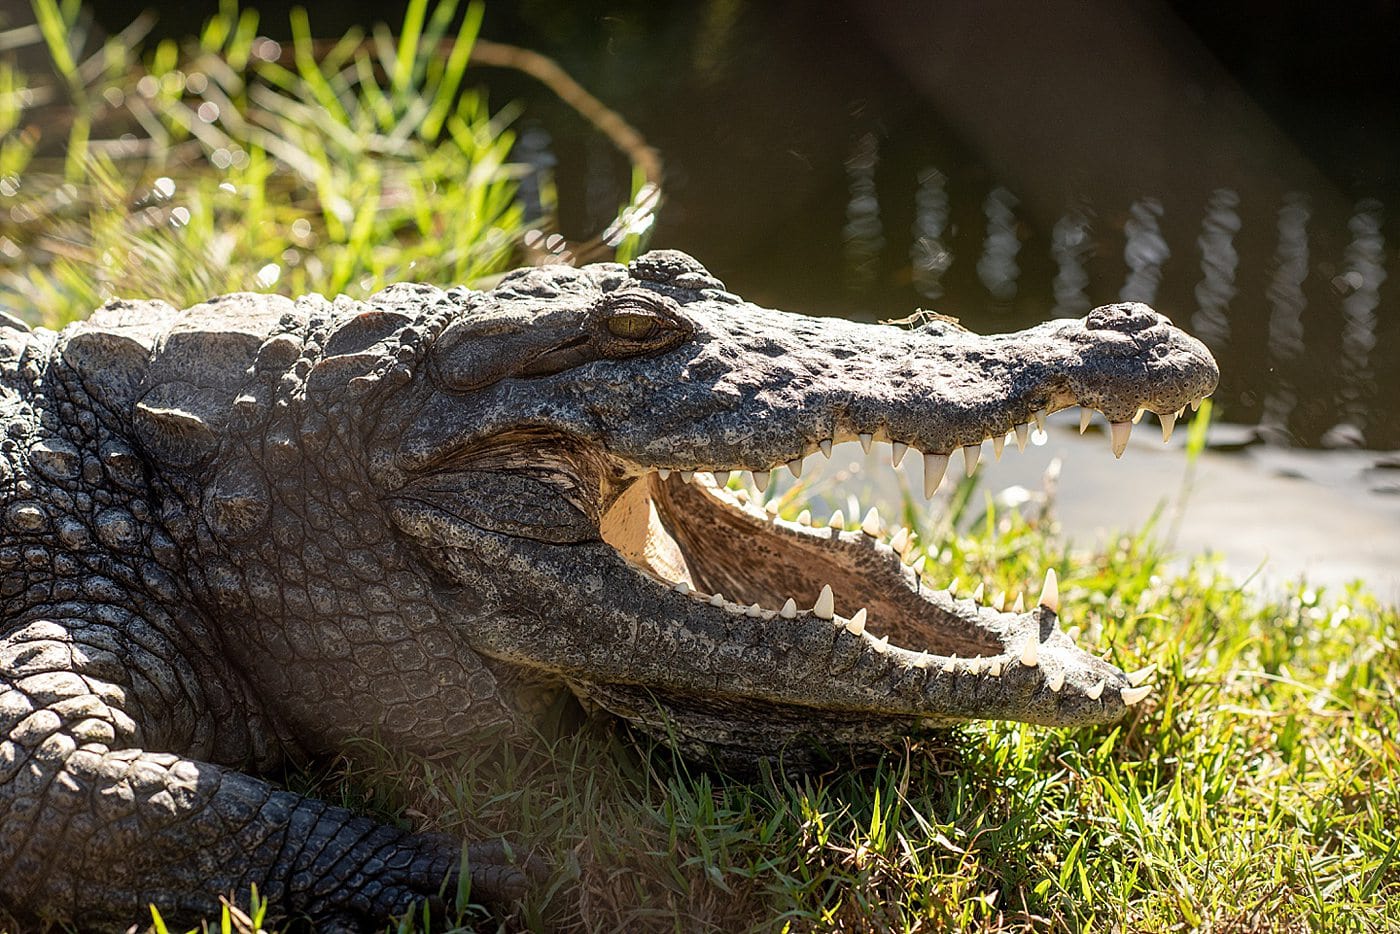 Fort Lauderdale Everglades tour of Everglades National Park in Florida, also easily accessible from Miami, with pictures of what to expect on an airboat ride in addition to alligators. #evergladesnationalpark